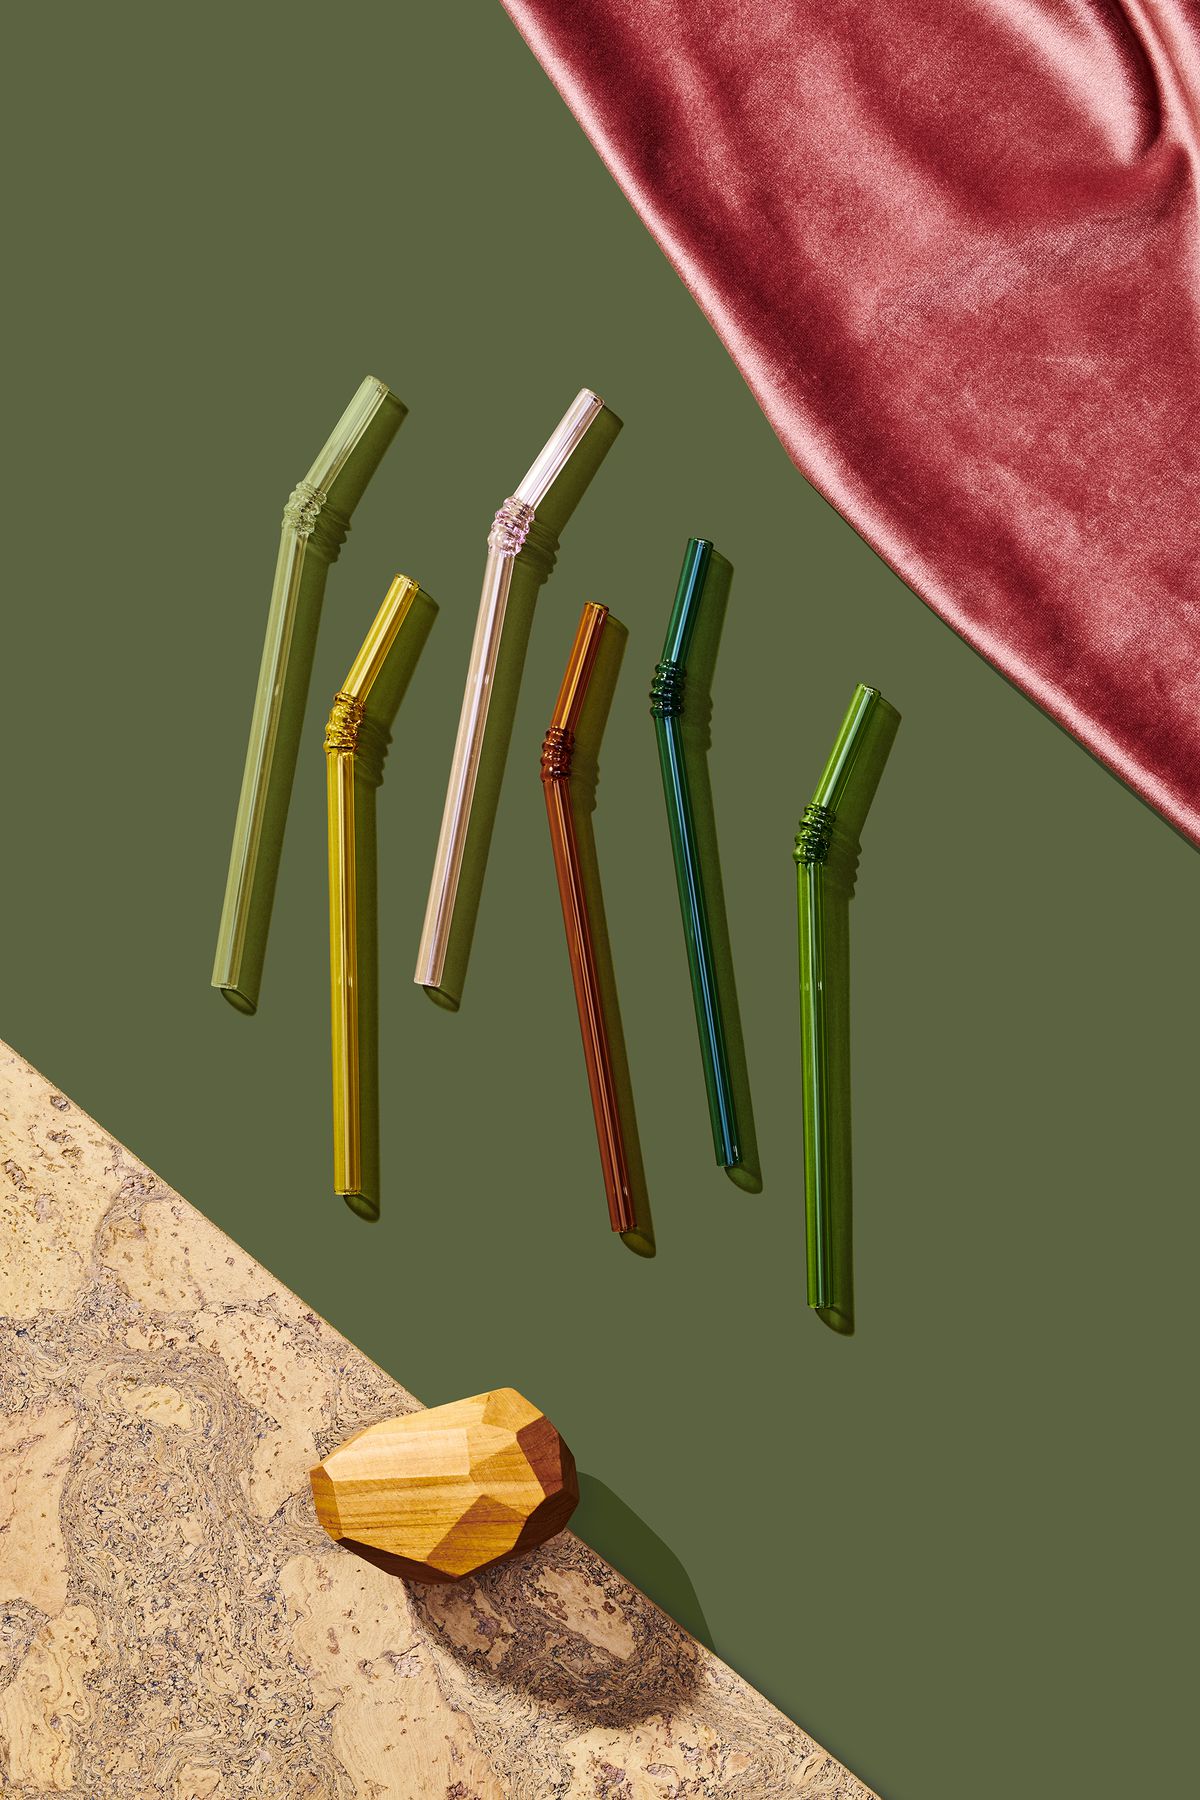 A group of six multicolored glass straws which are part of the 2019 Holiday Gift Guide for Curbed. The straws are on a flat green surface and are flanked by pink fabric and various design objects.